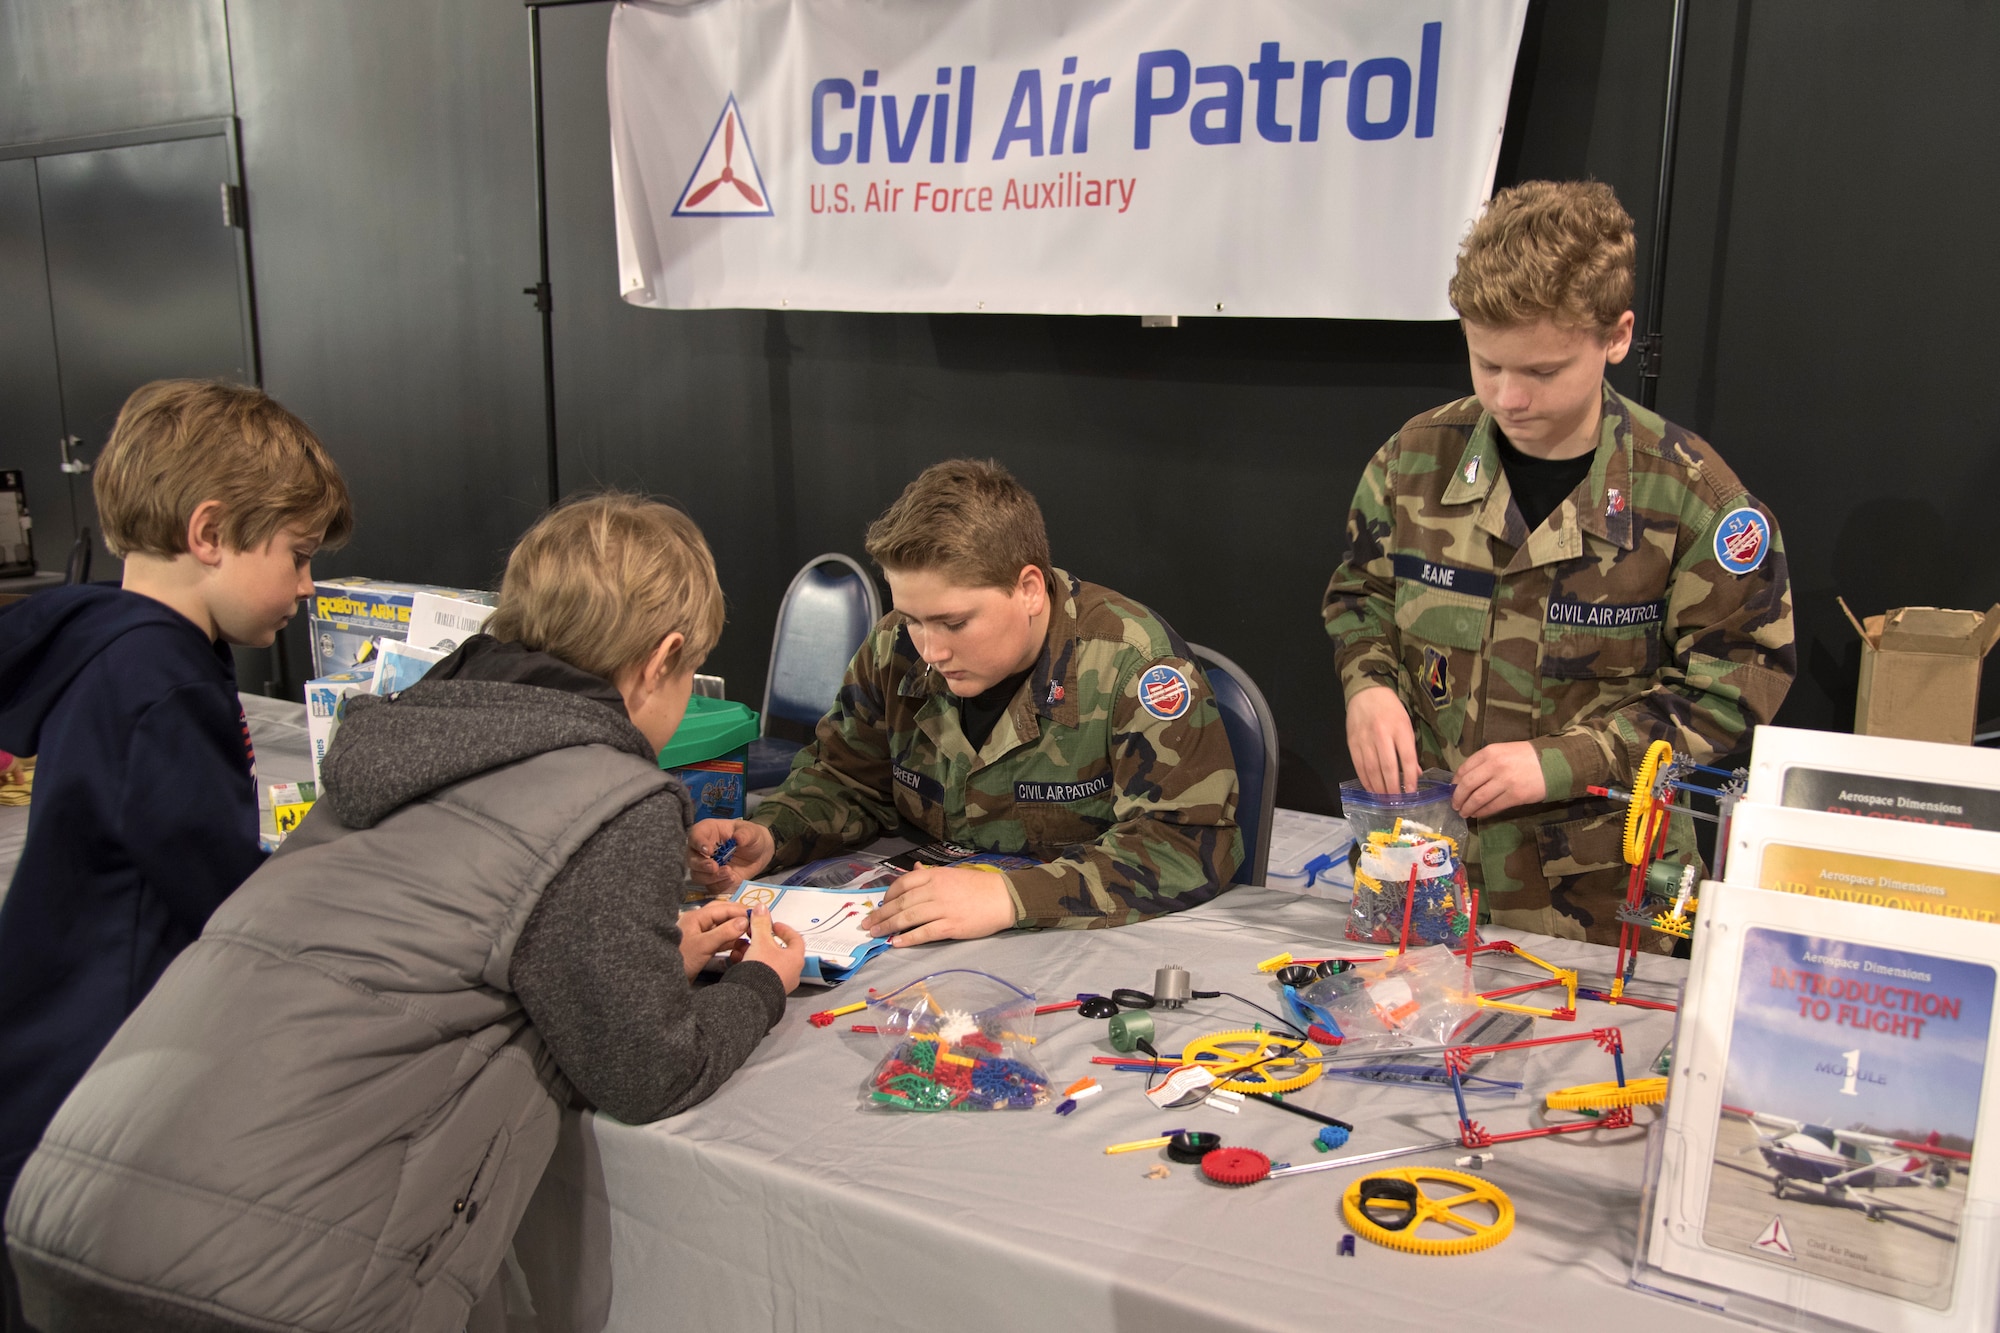 DAYTON, Ohio -- Students participating in Home School STEM Day on April 1, 2019, at the National Museum of the U.S. Air Force. Students enjoyed the guided tours, scavenger hunts, hands-on classes and aerospace demonstration stations. (U.S. Air Force photo)